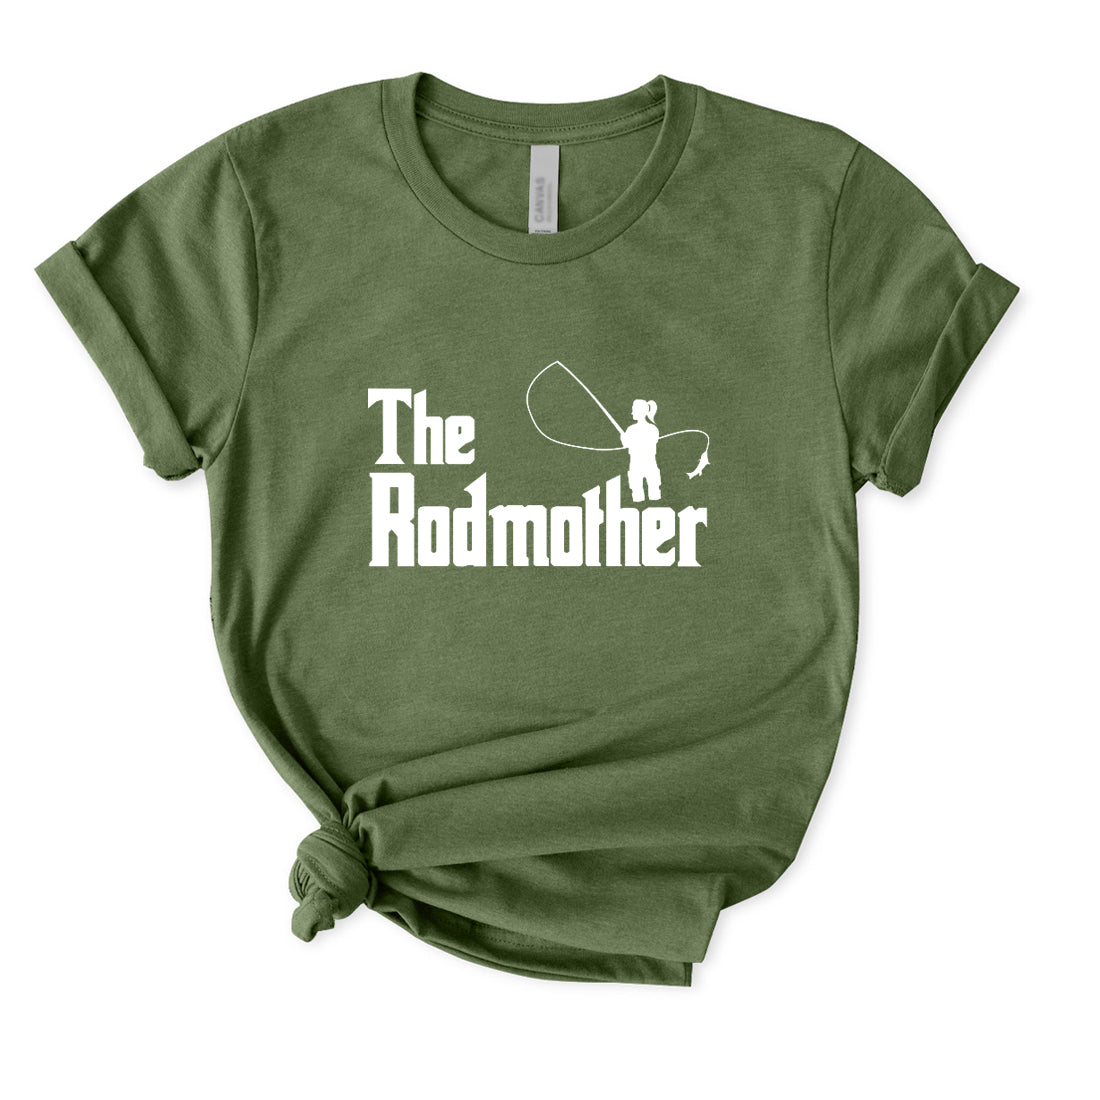 The Rodmother T-Shirt for Women